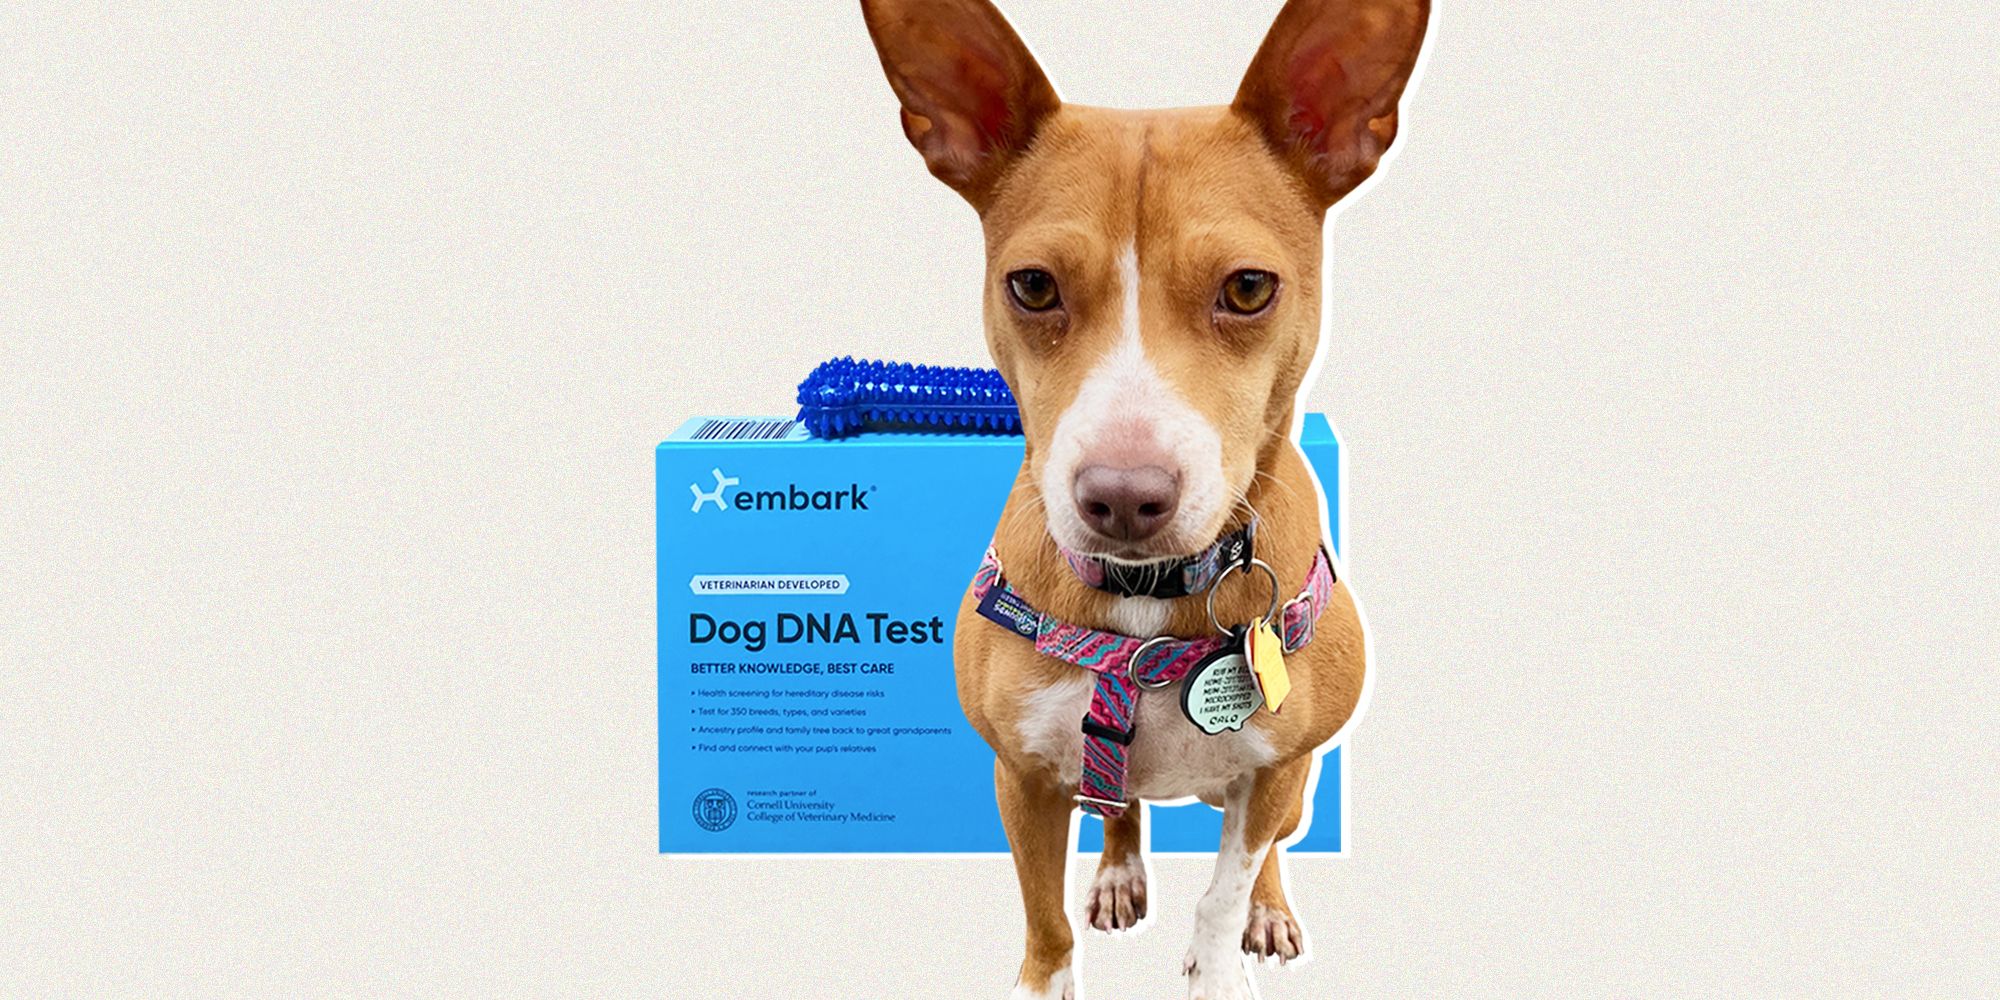 I Tried the Embark Vet Dog DNA Test on My Adopted Pup and Got